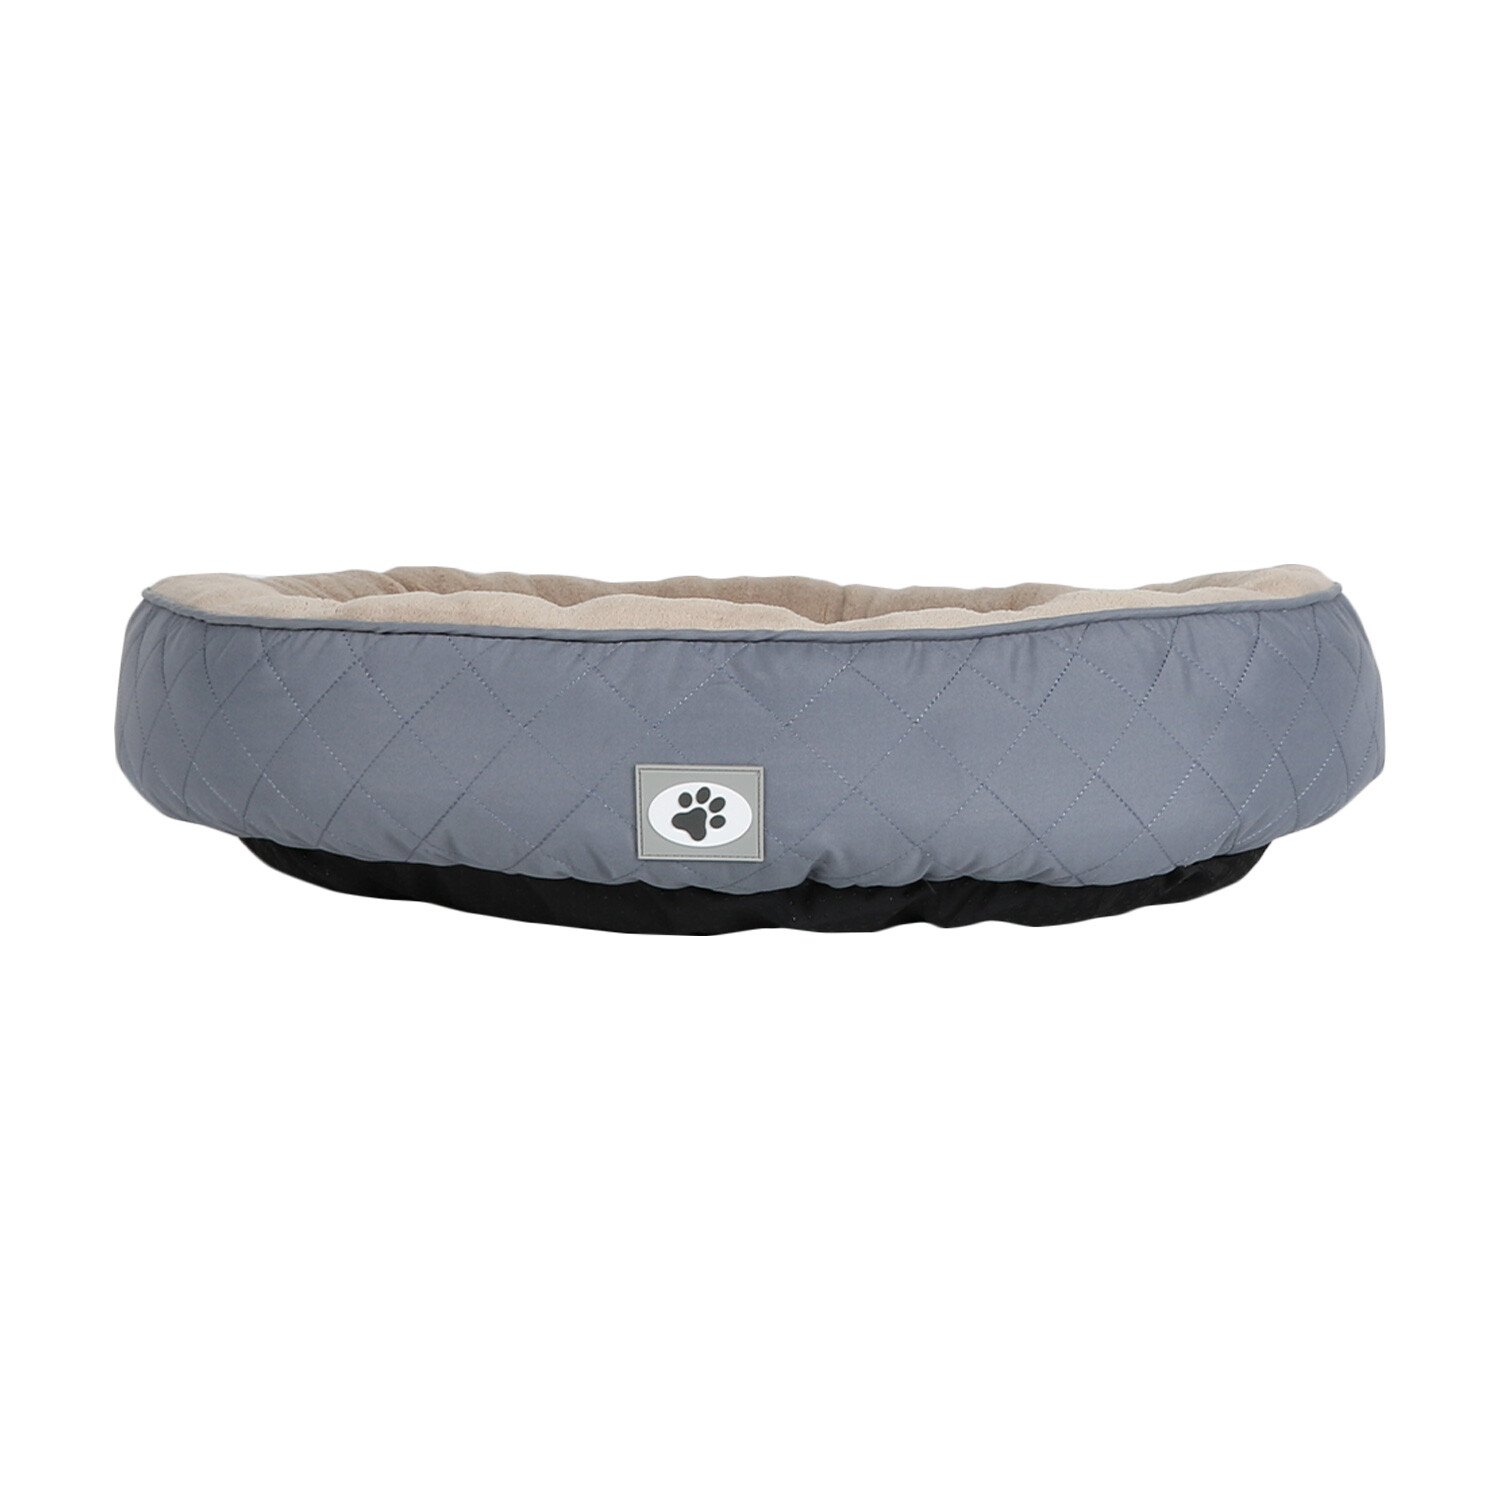 Snuggle Round Pet Bed Image 1